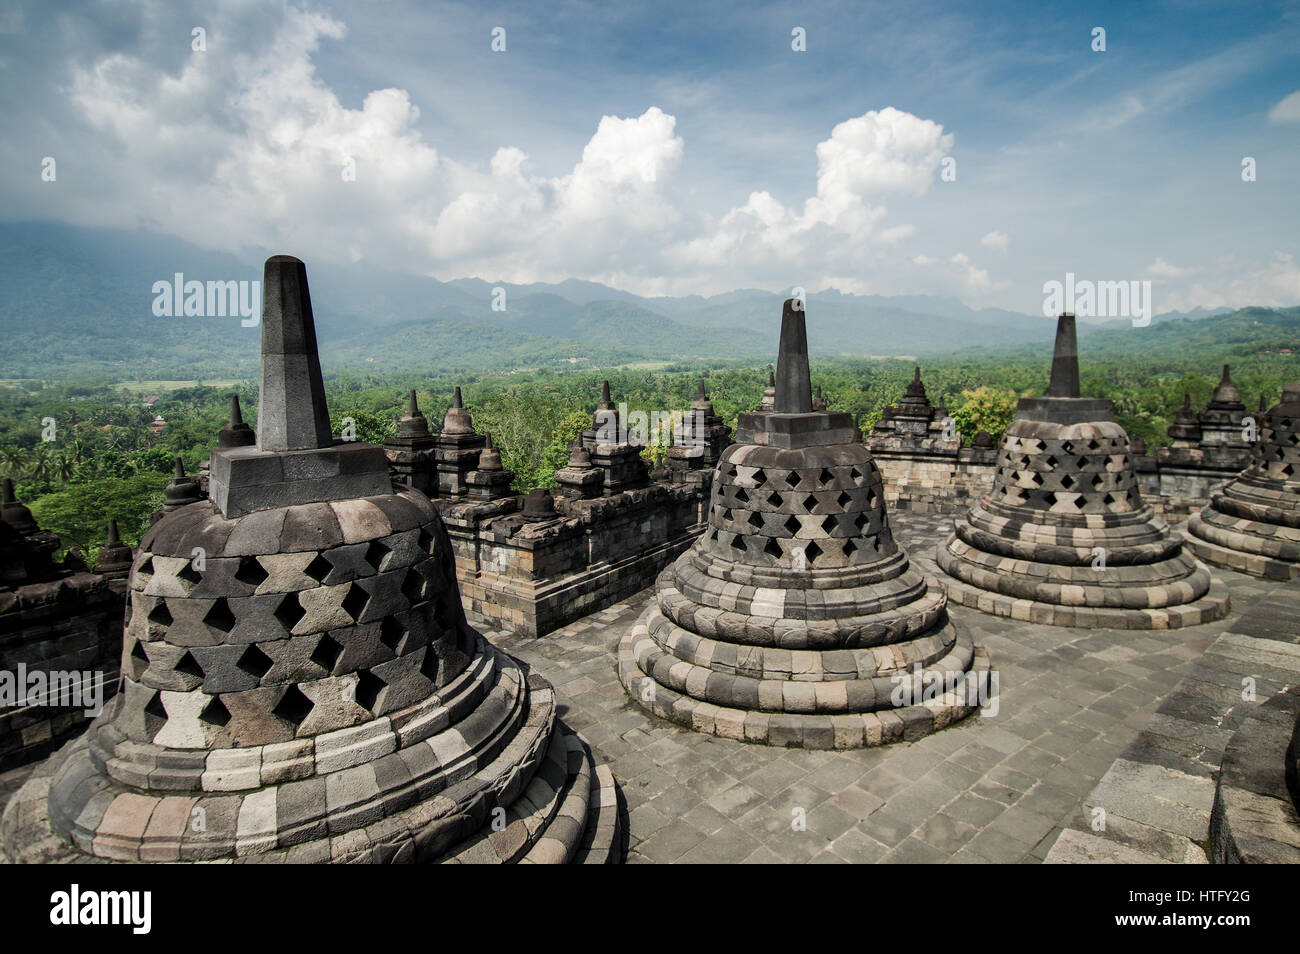 Borobudur Buddhist Temple in Magelang, Central Java Stock Photo